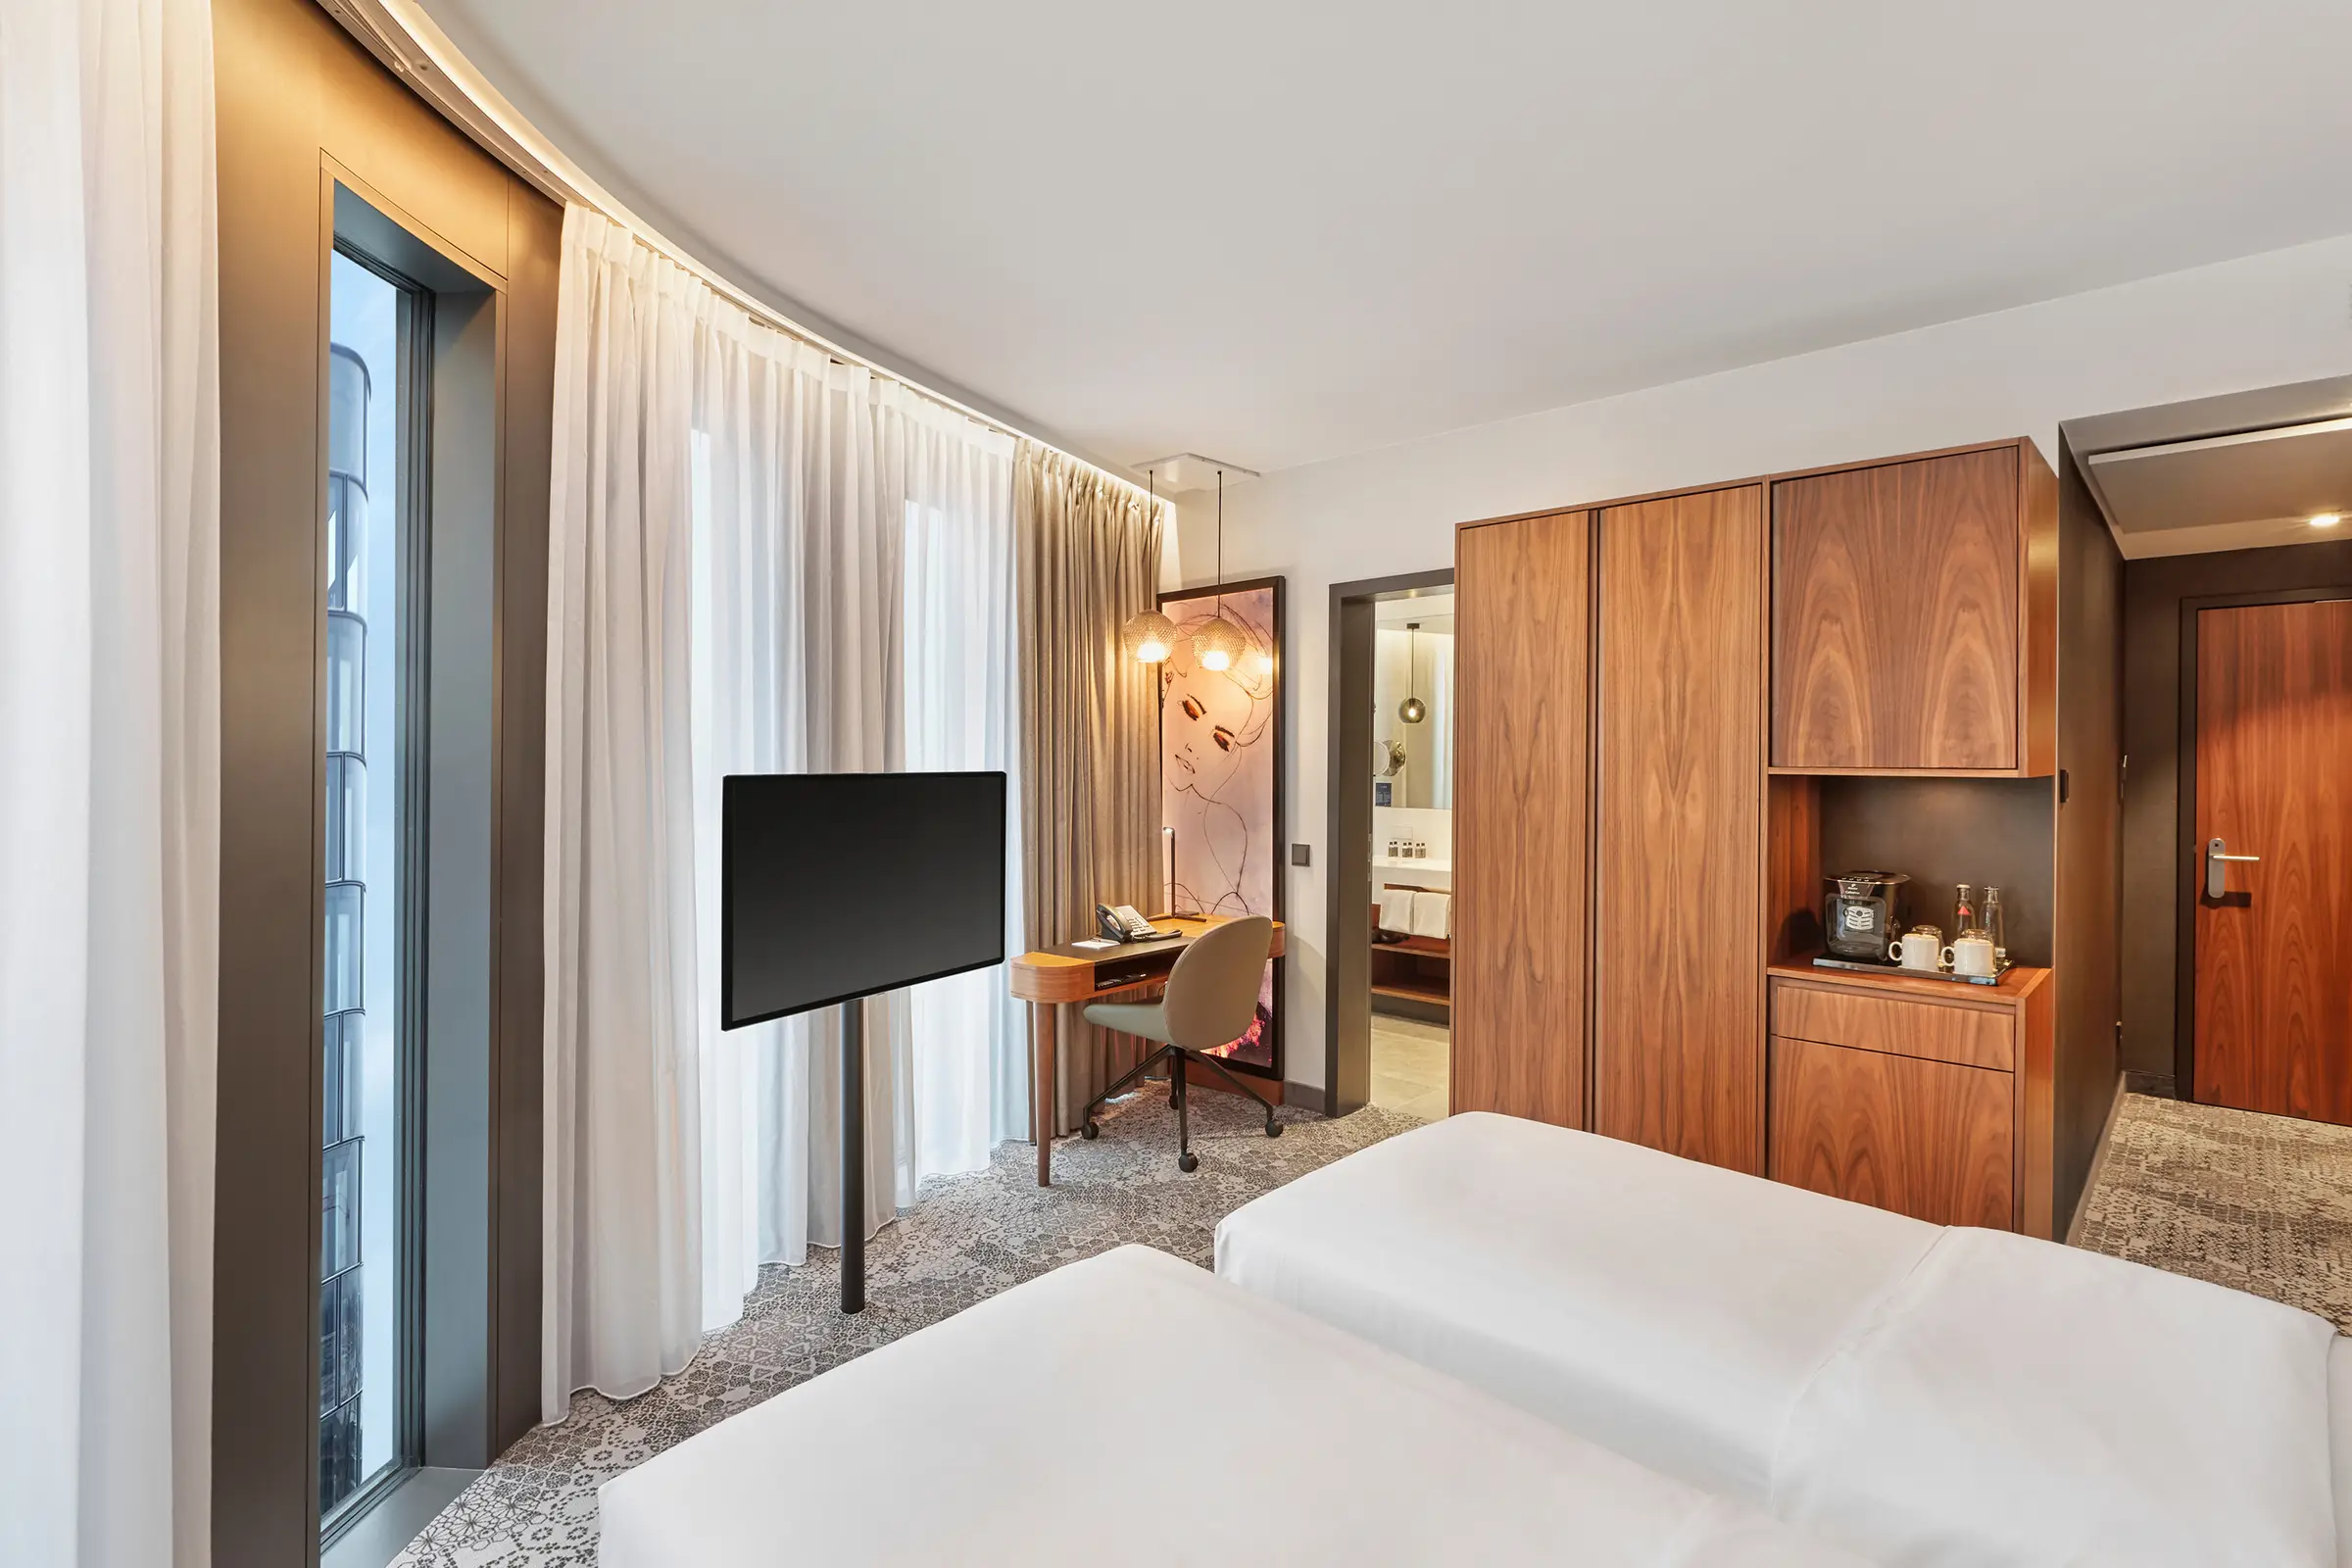 Business Twin room at the Hyperion Hotel München - Official website